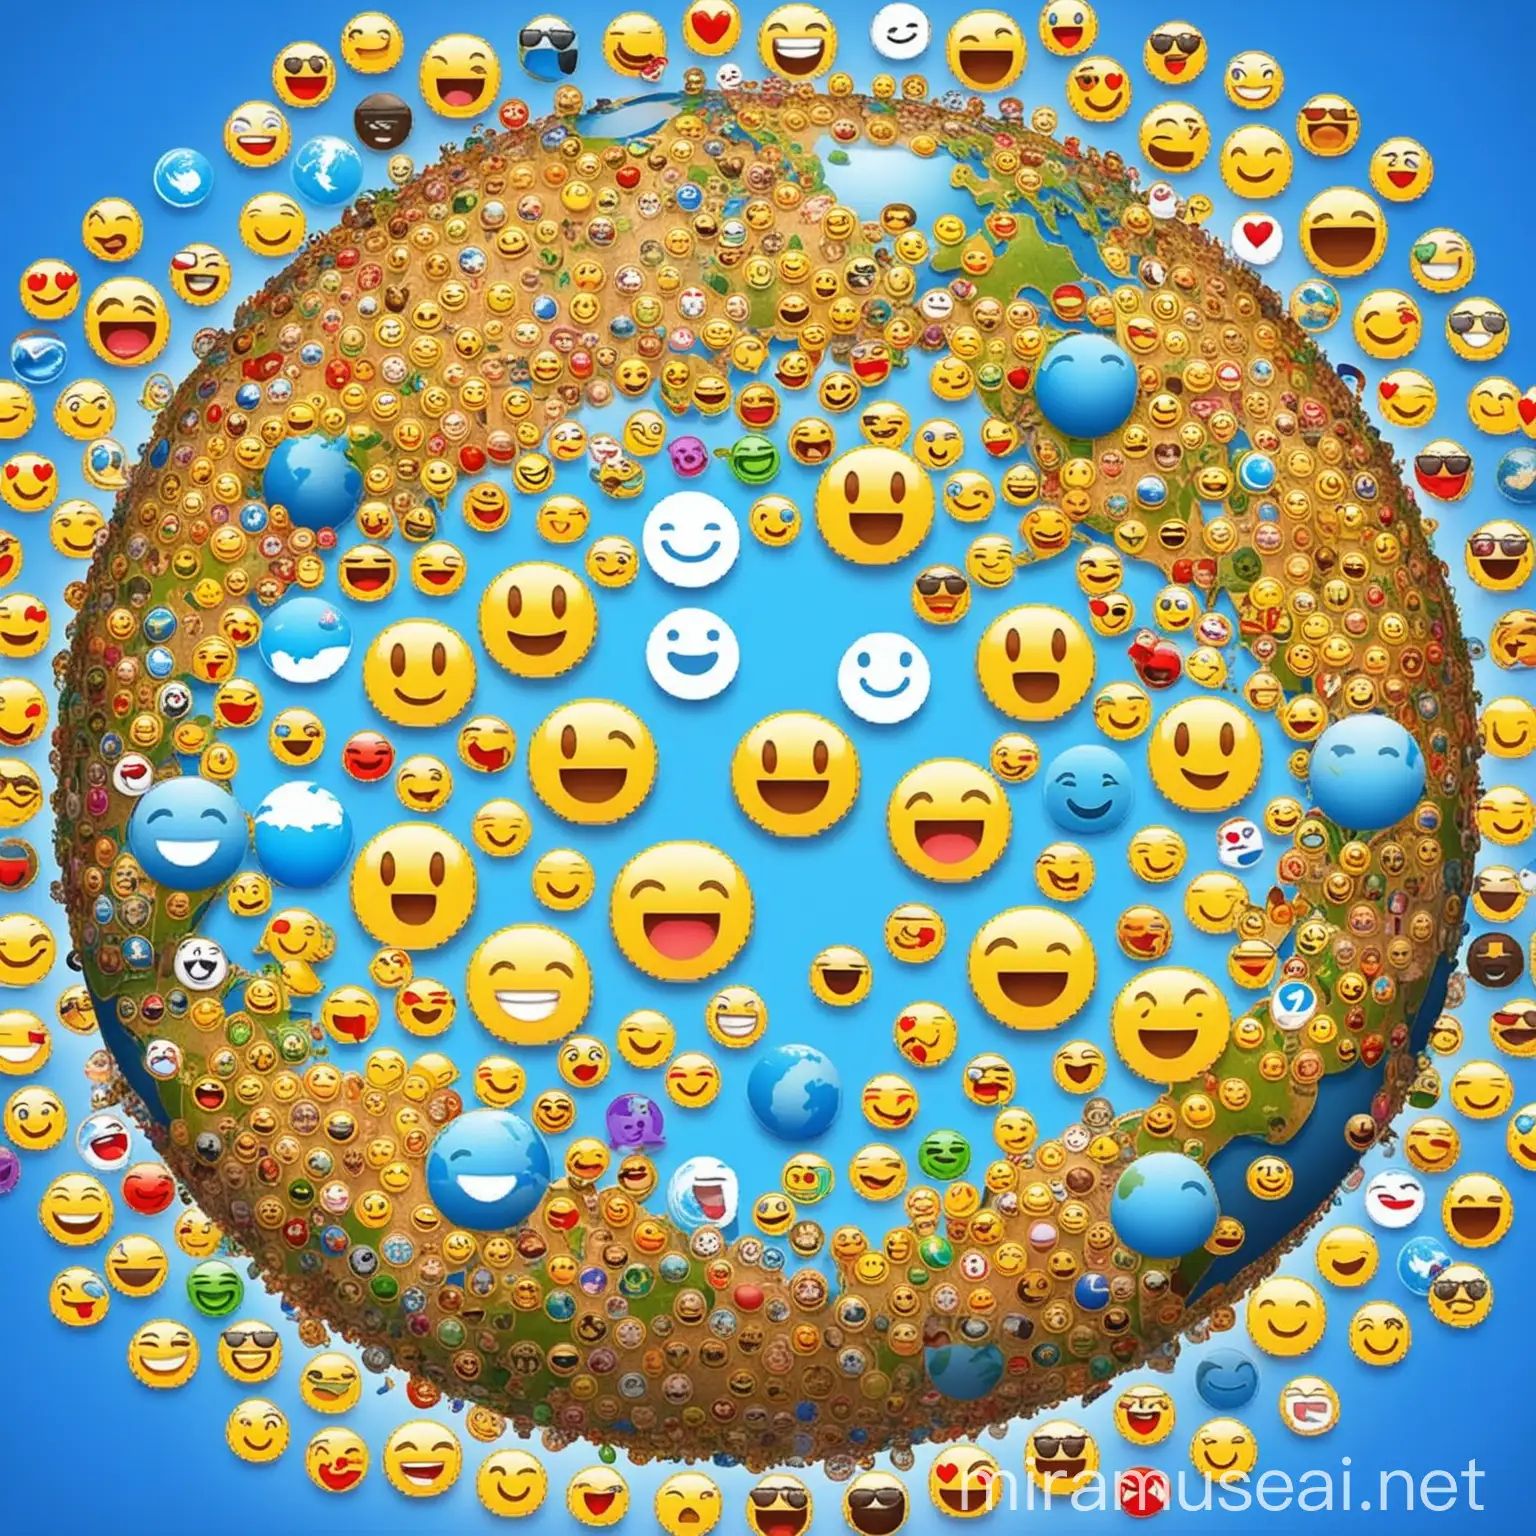  smile and the whole world smiles with you in emojis place a globe in the centre of the image with a smiling face and smiling emojis surrounding it

